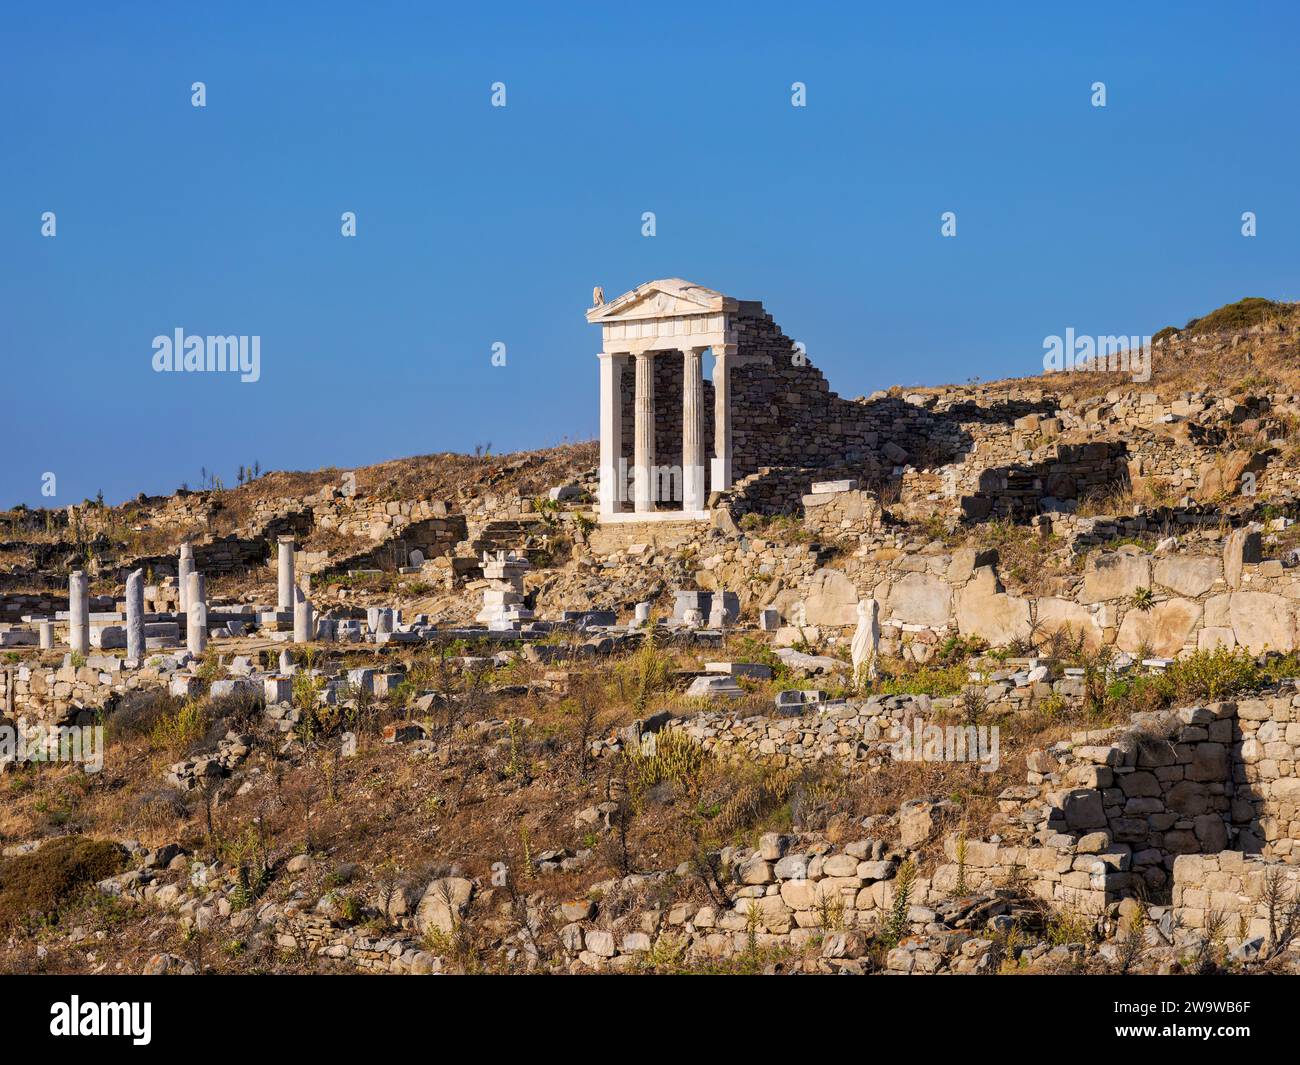 Temple of Isis, Delos Archaeological Site, Delos Island, Cyclades, Greece Stock Photo